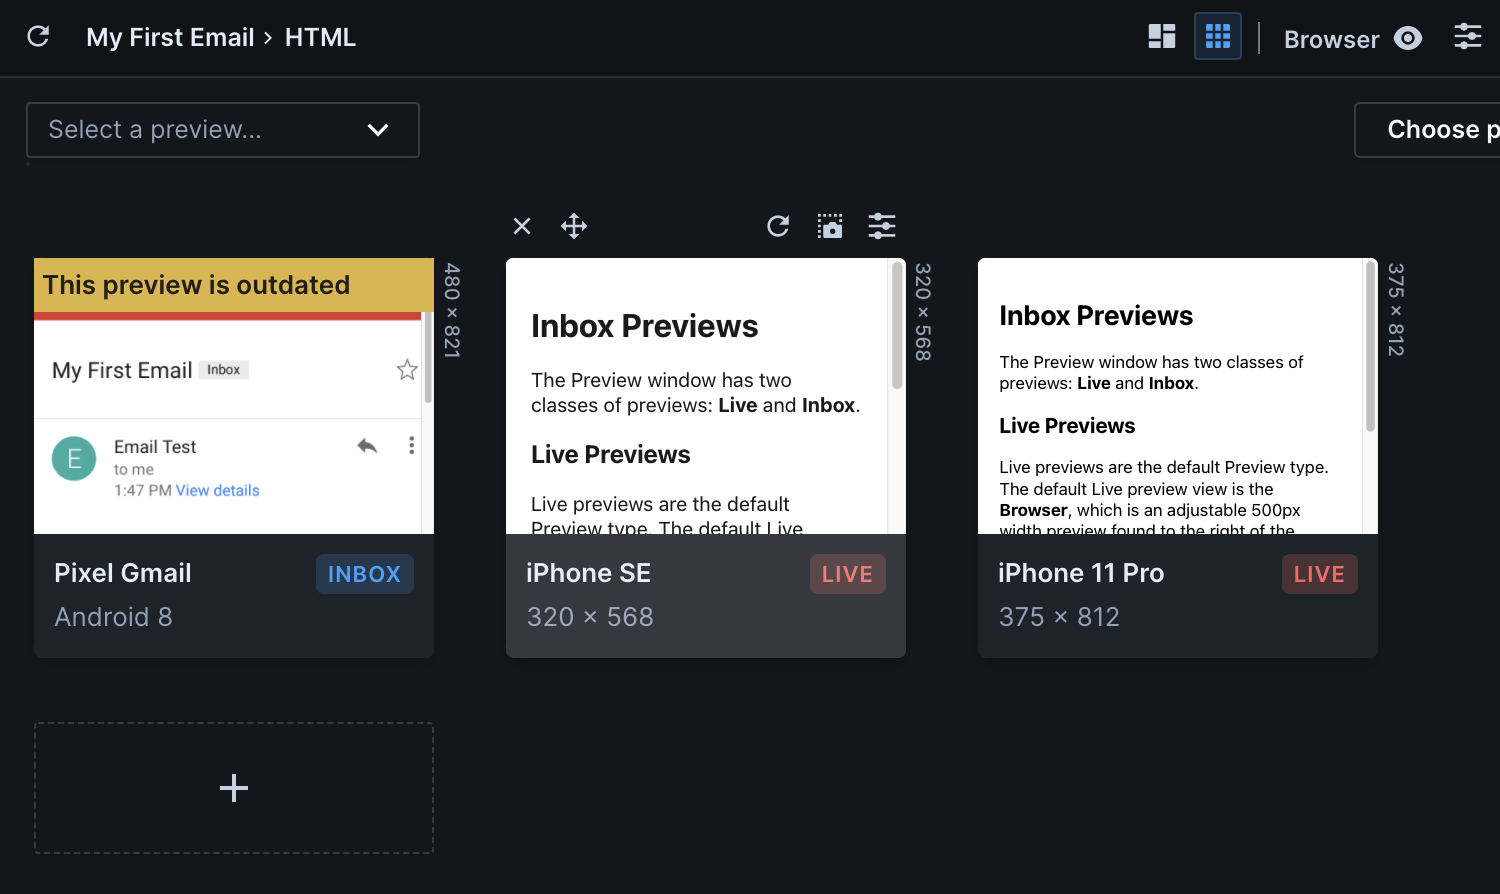 Image of the Preview window in Parcel. Three previews are displayed, each for a different phone. Each preview is the same size square. Each is labeled with it's device name, it's screen dimensions, and a label that reads either "Live" or "Inbox". Above the center preview are several additional buttons - "Close", "Move", "Refresh", "Take screenshot" and "Preview Controls".